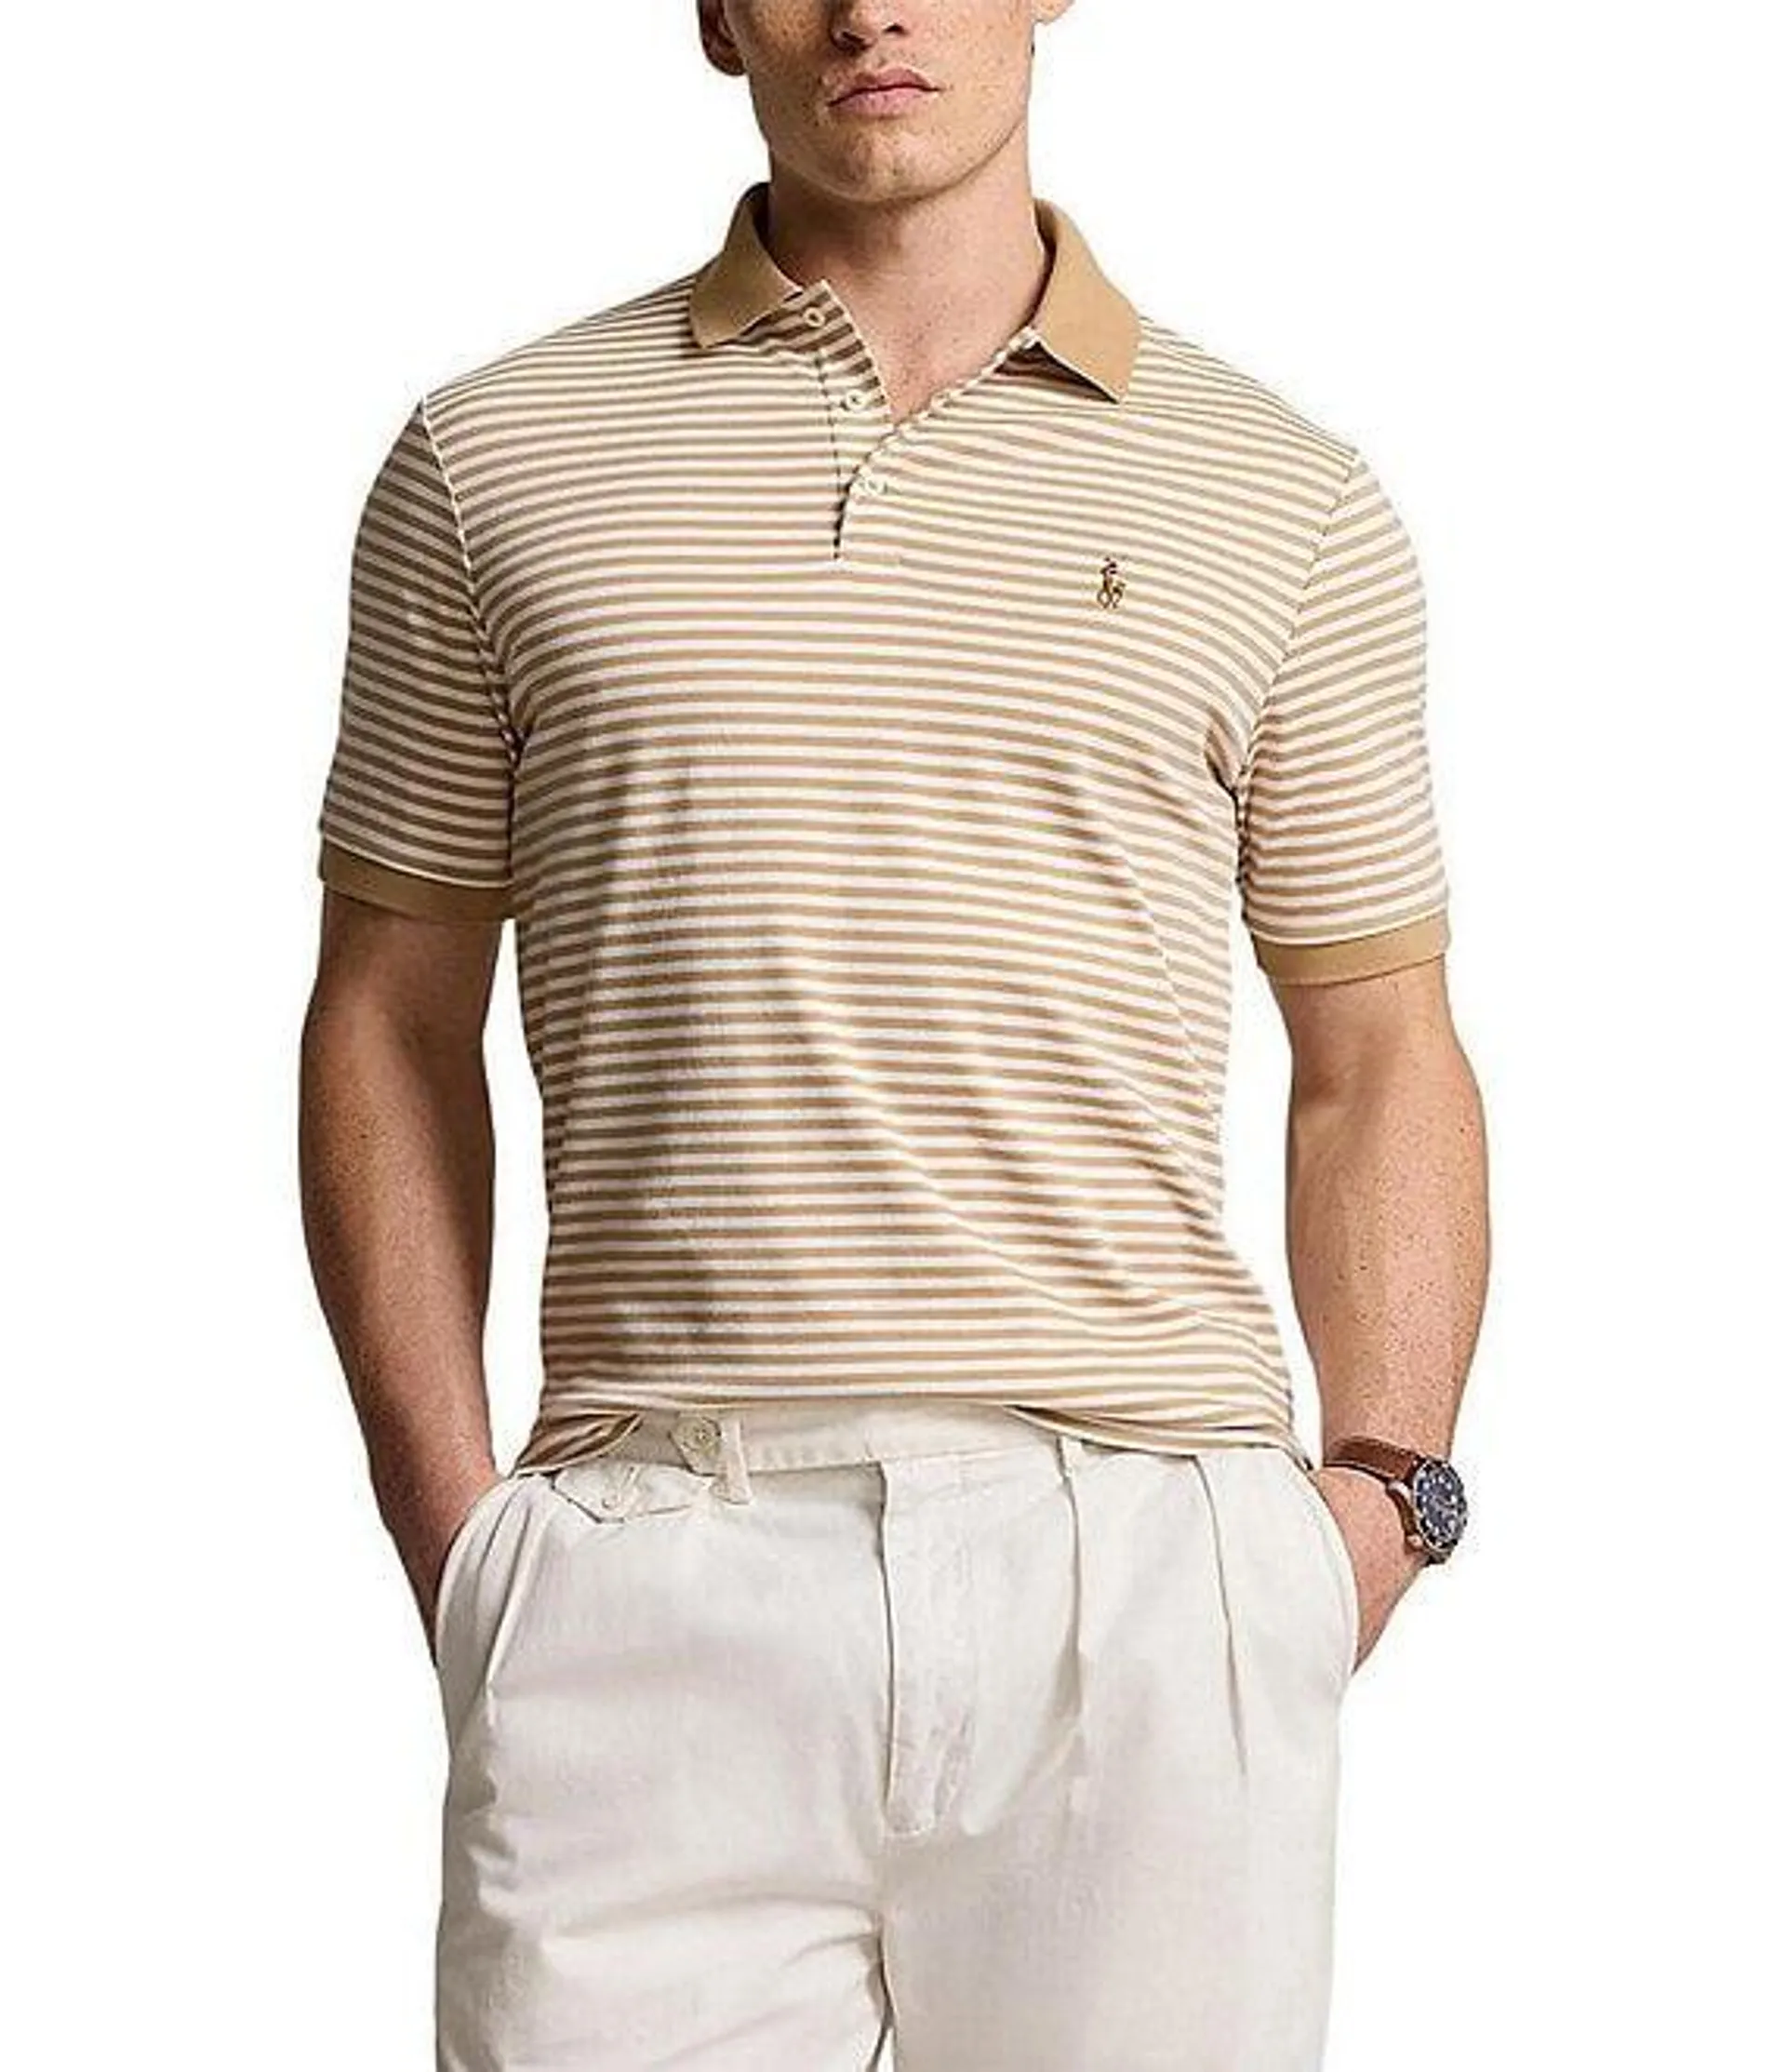 Big & Tall Classic Fit Short Sleeve Striped Polo Shirt